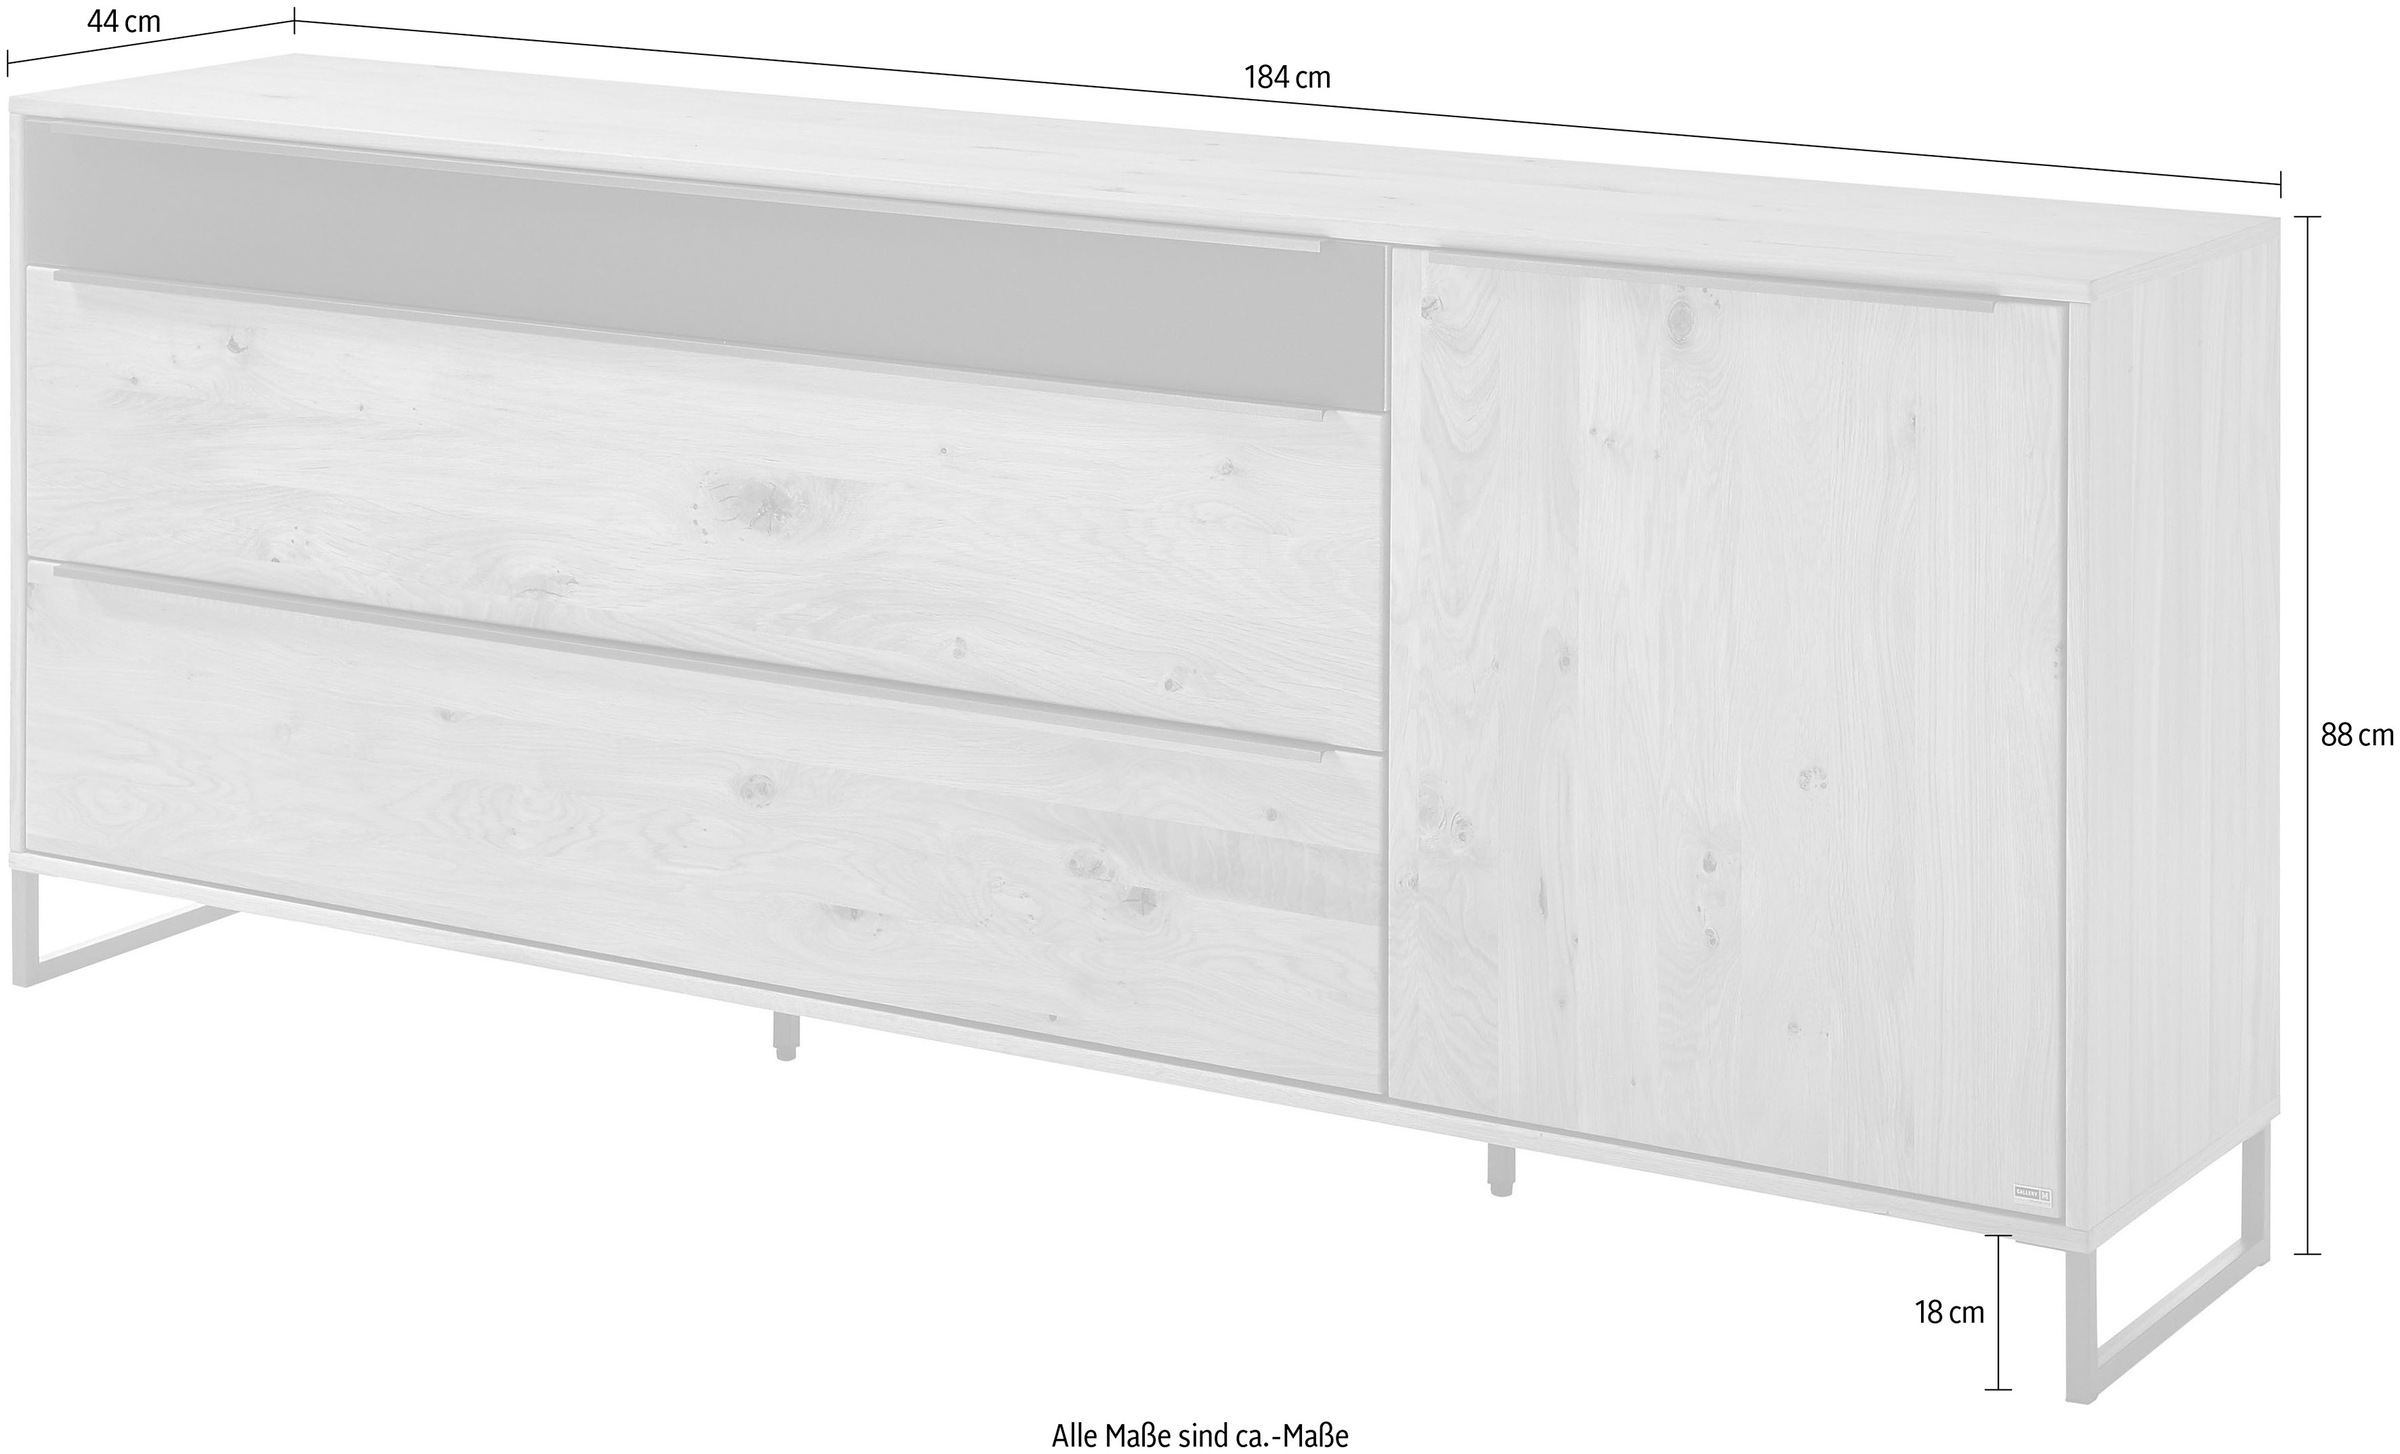 »Alan«, by Front in anthrazit BAUR Metall branded Eiche Sideboard GALLERY Musterring geölt, Bainco Kufengestell in Massiv | M